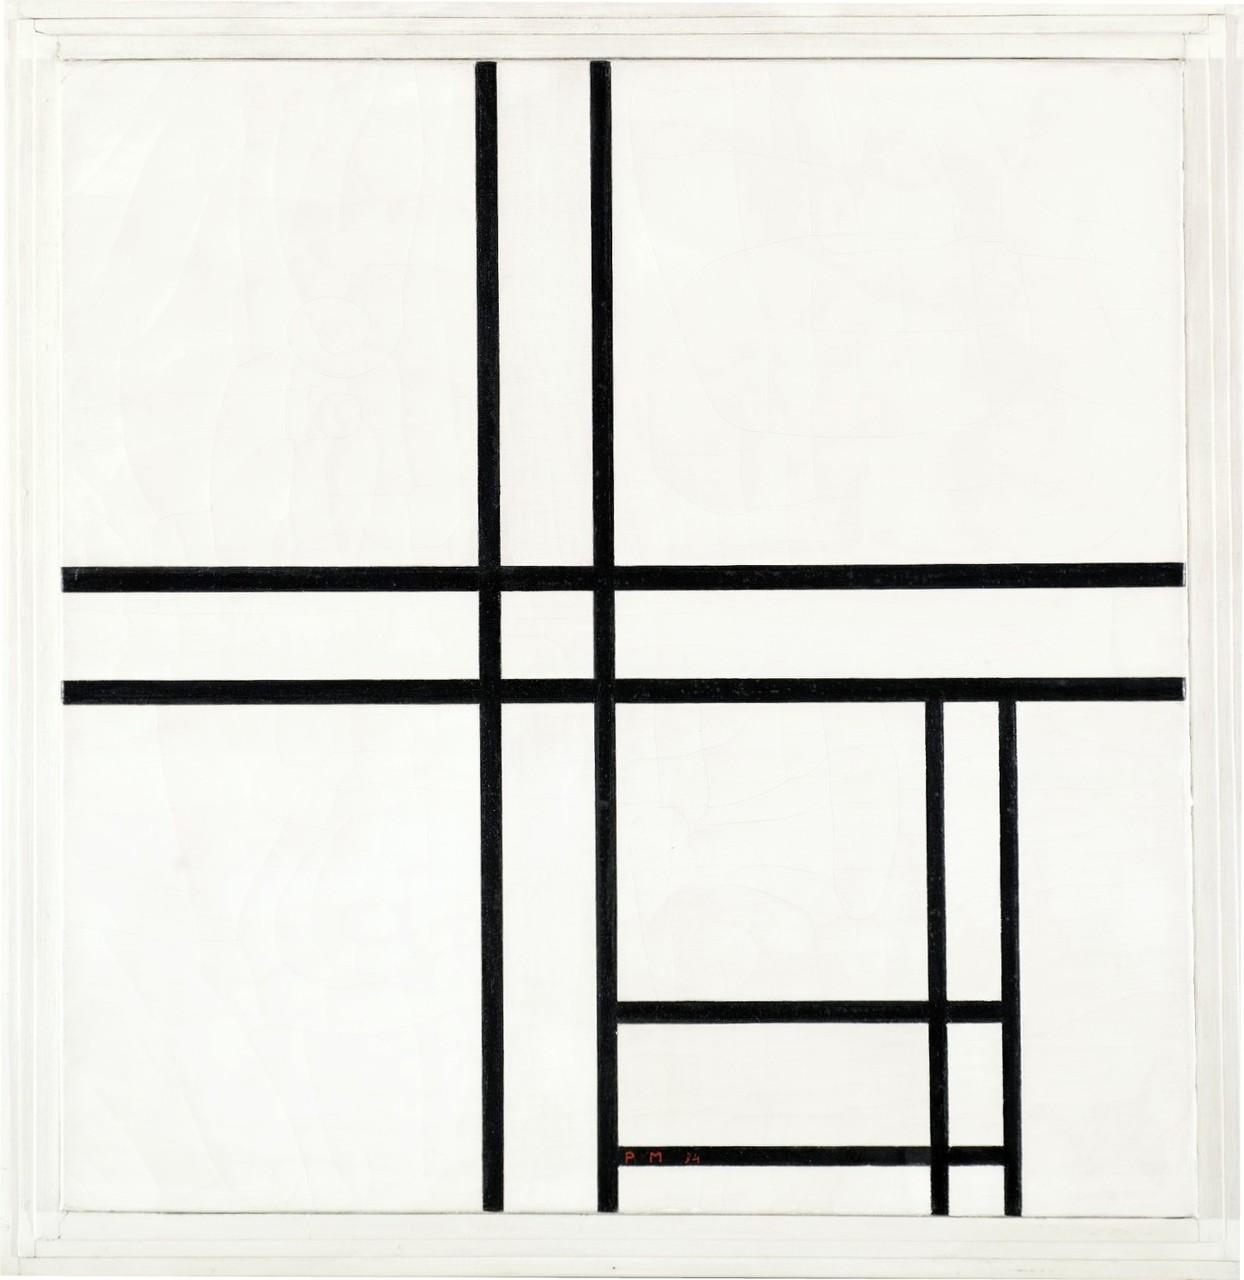 Mondrian art, mondrian abstract art, mondrian black and white